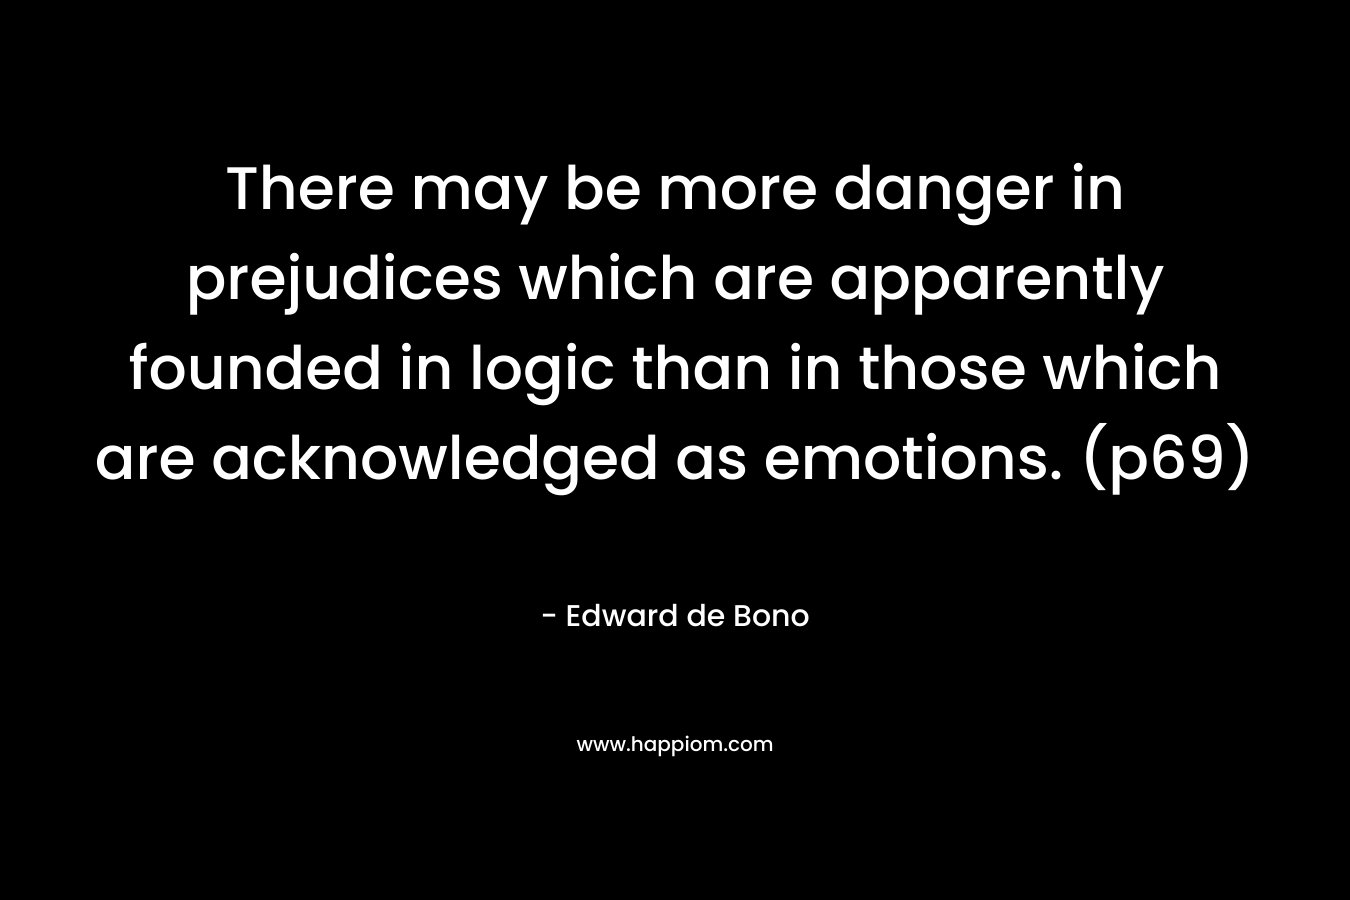 There may be more danger in prejudices which are apparently founded in logic than in those which are acknowledged as emotions. (p69)